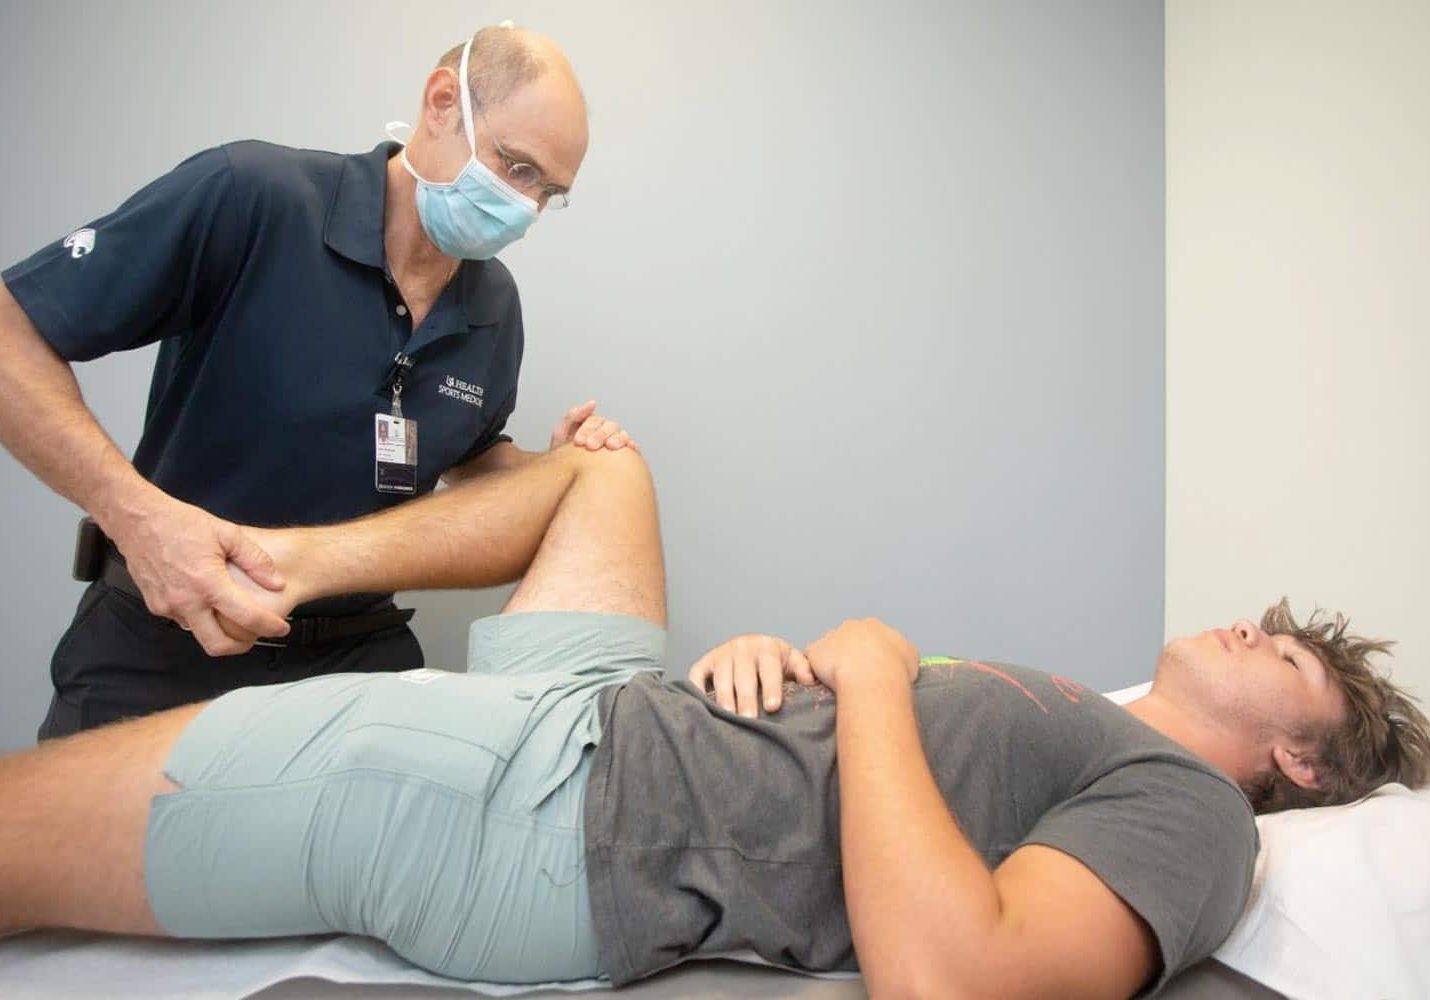 USA Health To Provide Sports Medicine For MCPSS